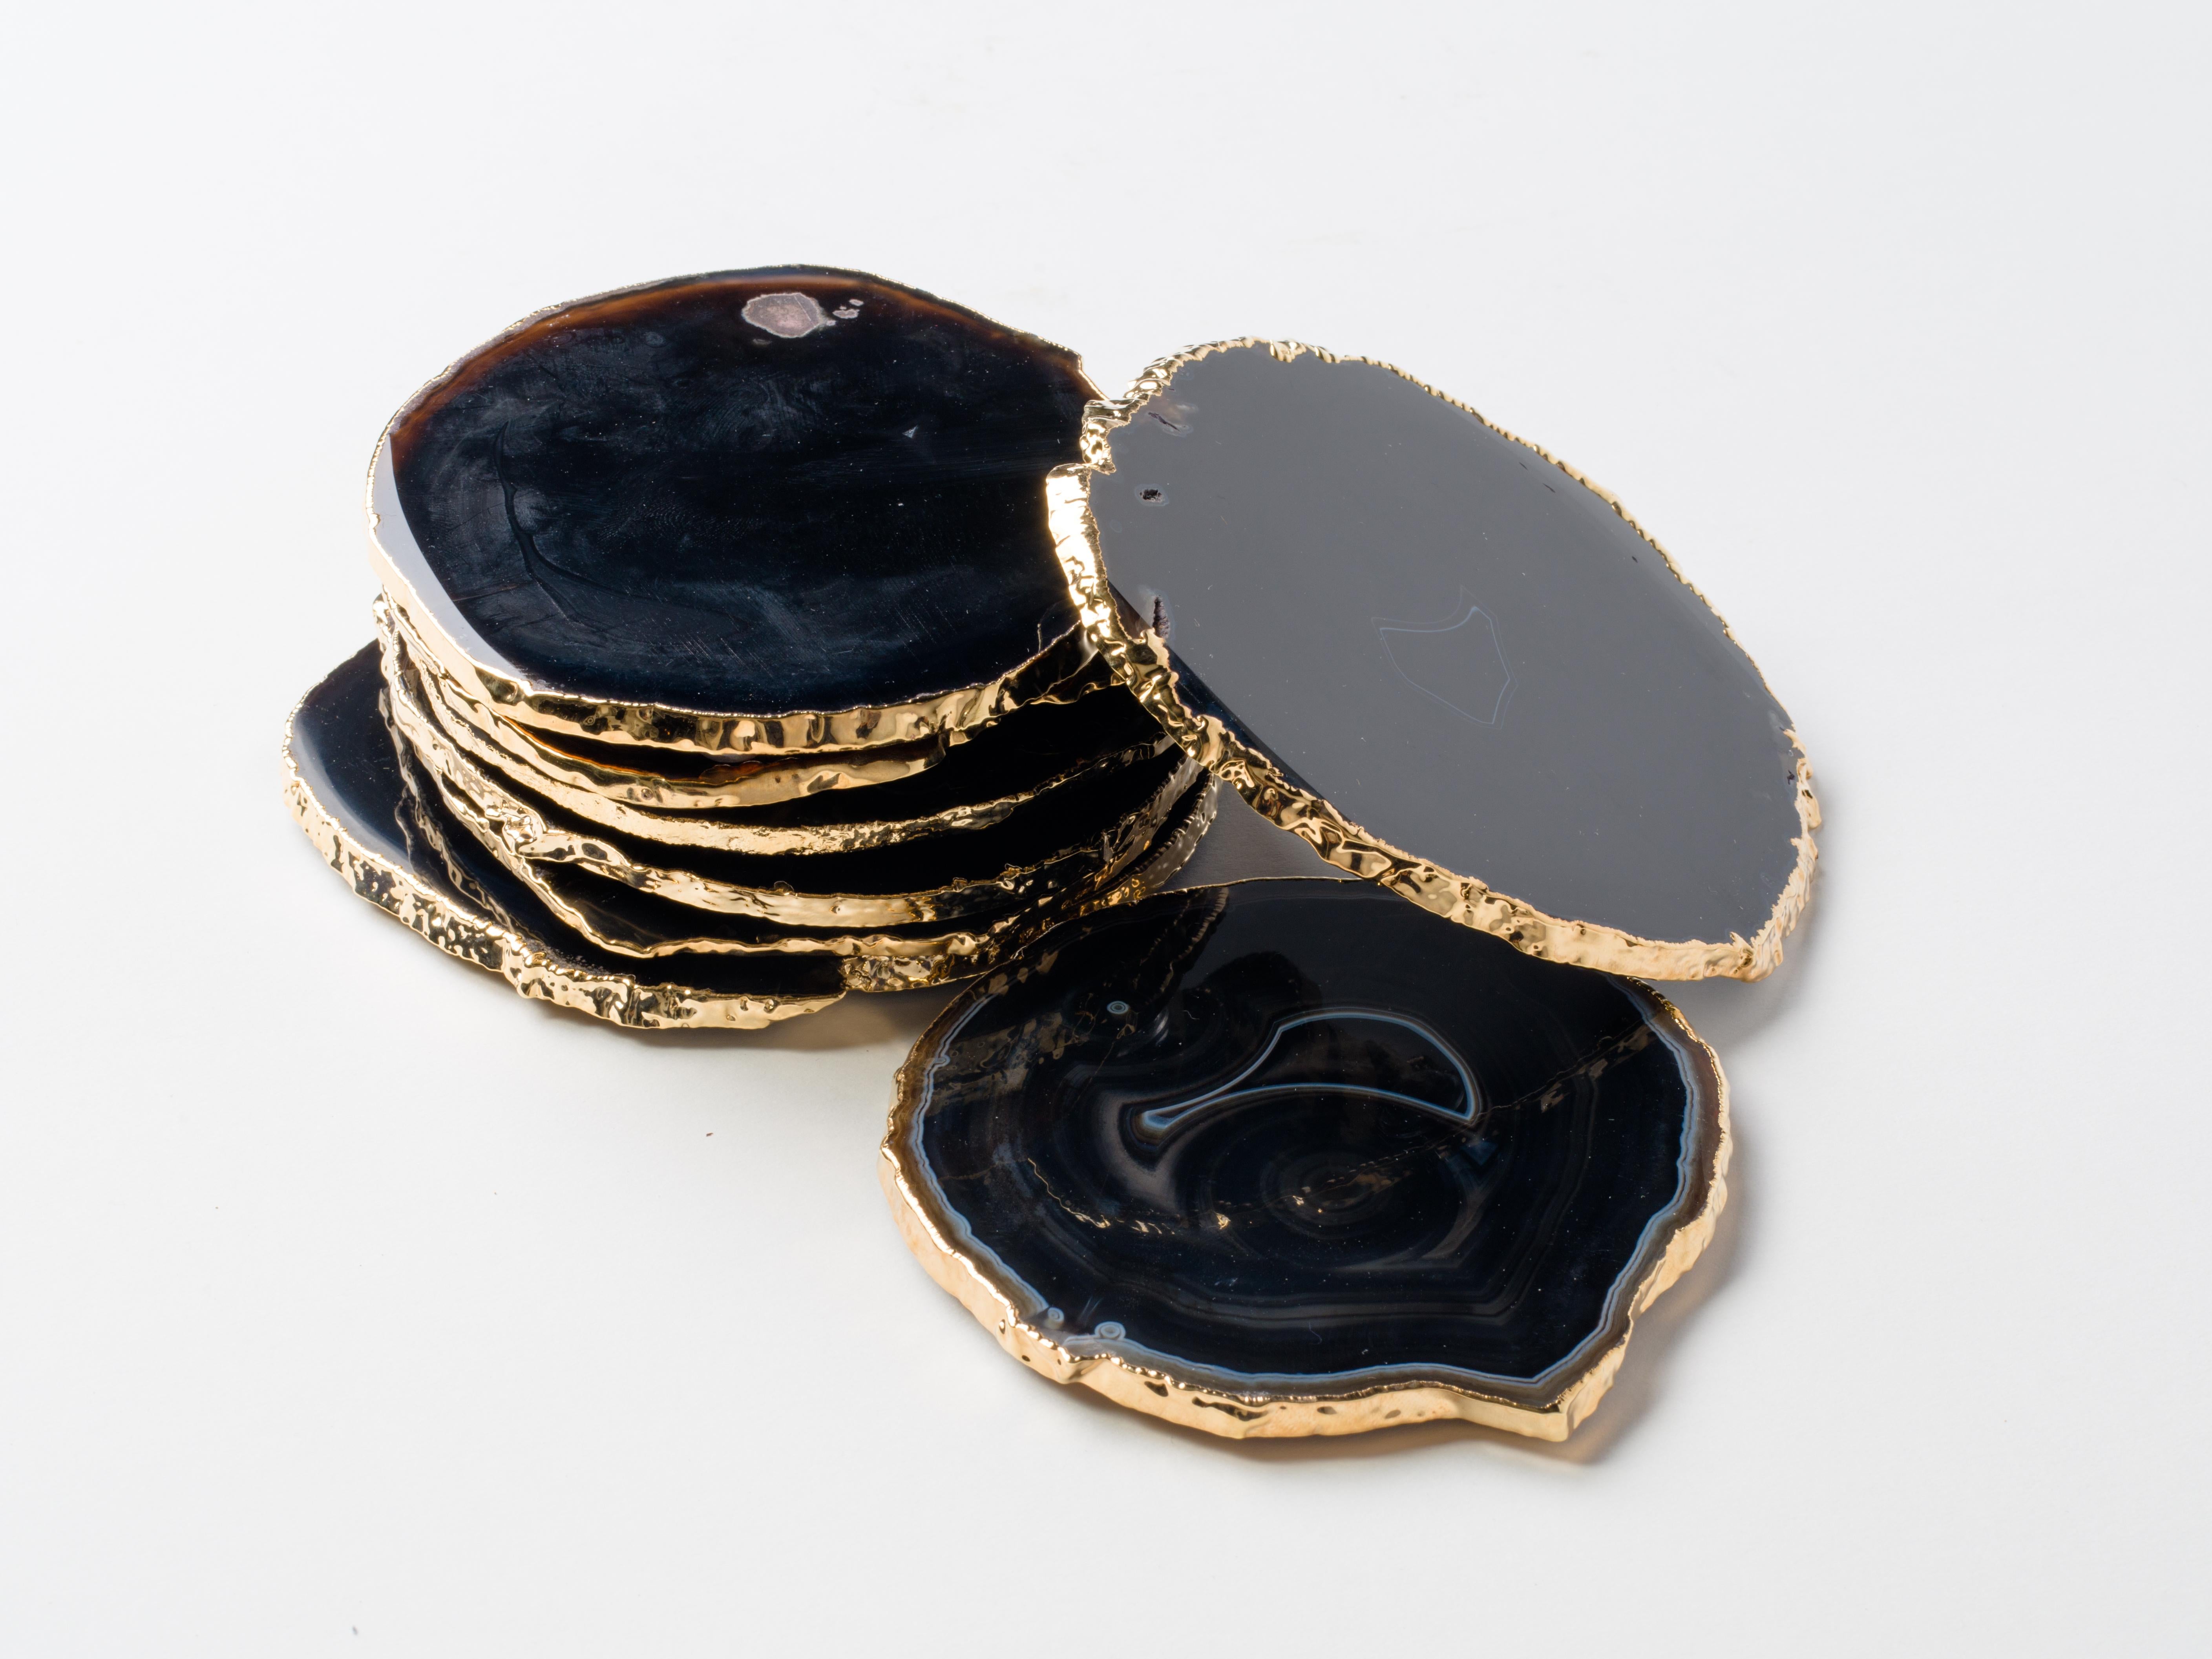 Organic modern agate and crystal coasters in black onyx and brown with 24-karat gold-plated edges. The set features polished fronts and natural rough edges. No two pieces are alike. Stunning natural accessories are a welcomed addition to any coffee